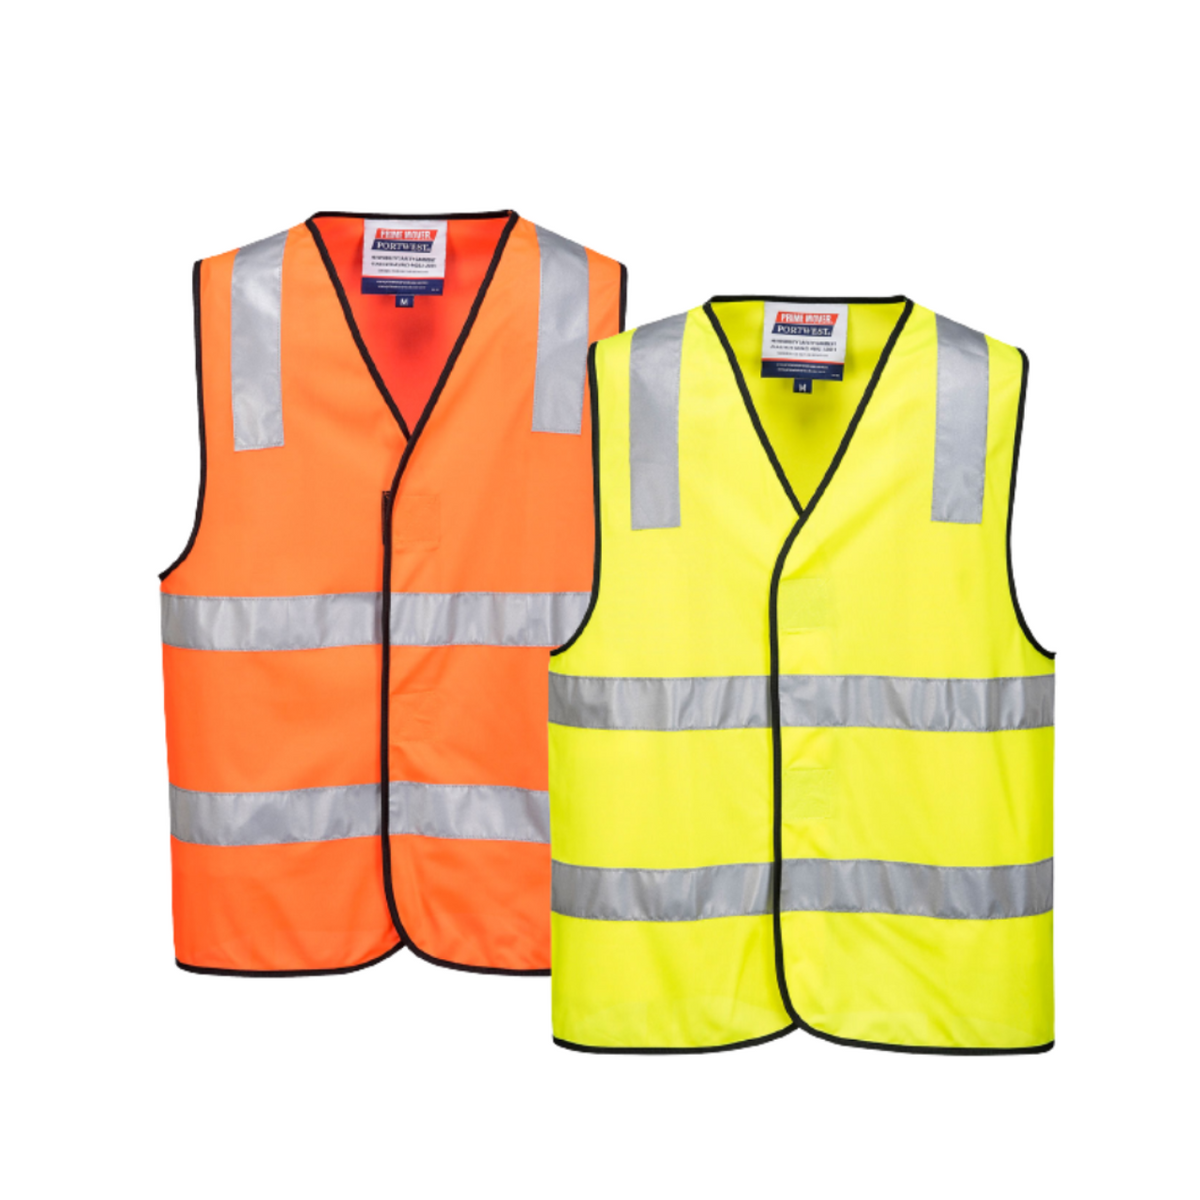 Portwest Day/Night Vest 2 Tone Hi Vis Relfective Taped Work Safety MV102-Collins Clothing Co